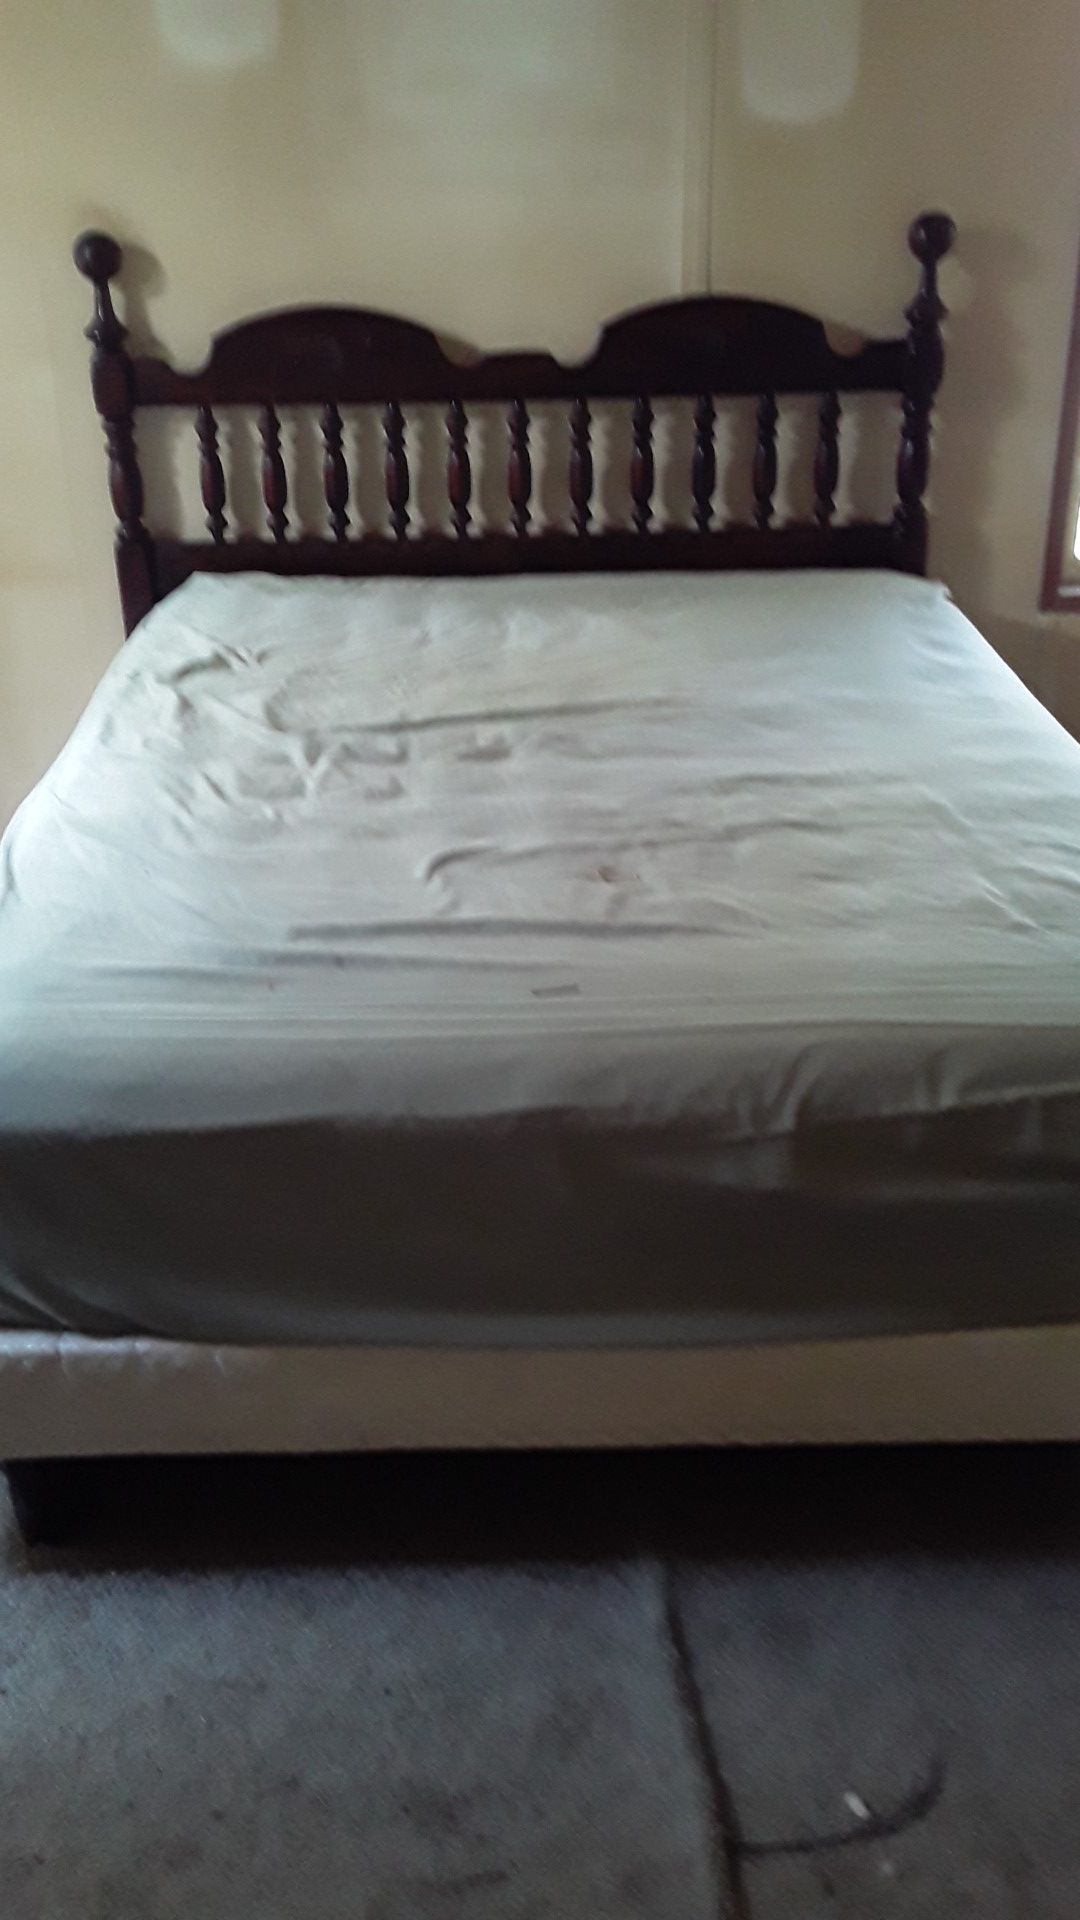 Bedroom set: Matress headboard with the mirror and dresser $200 OBO